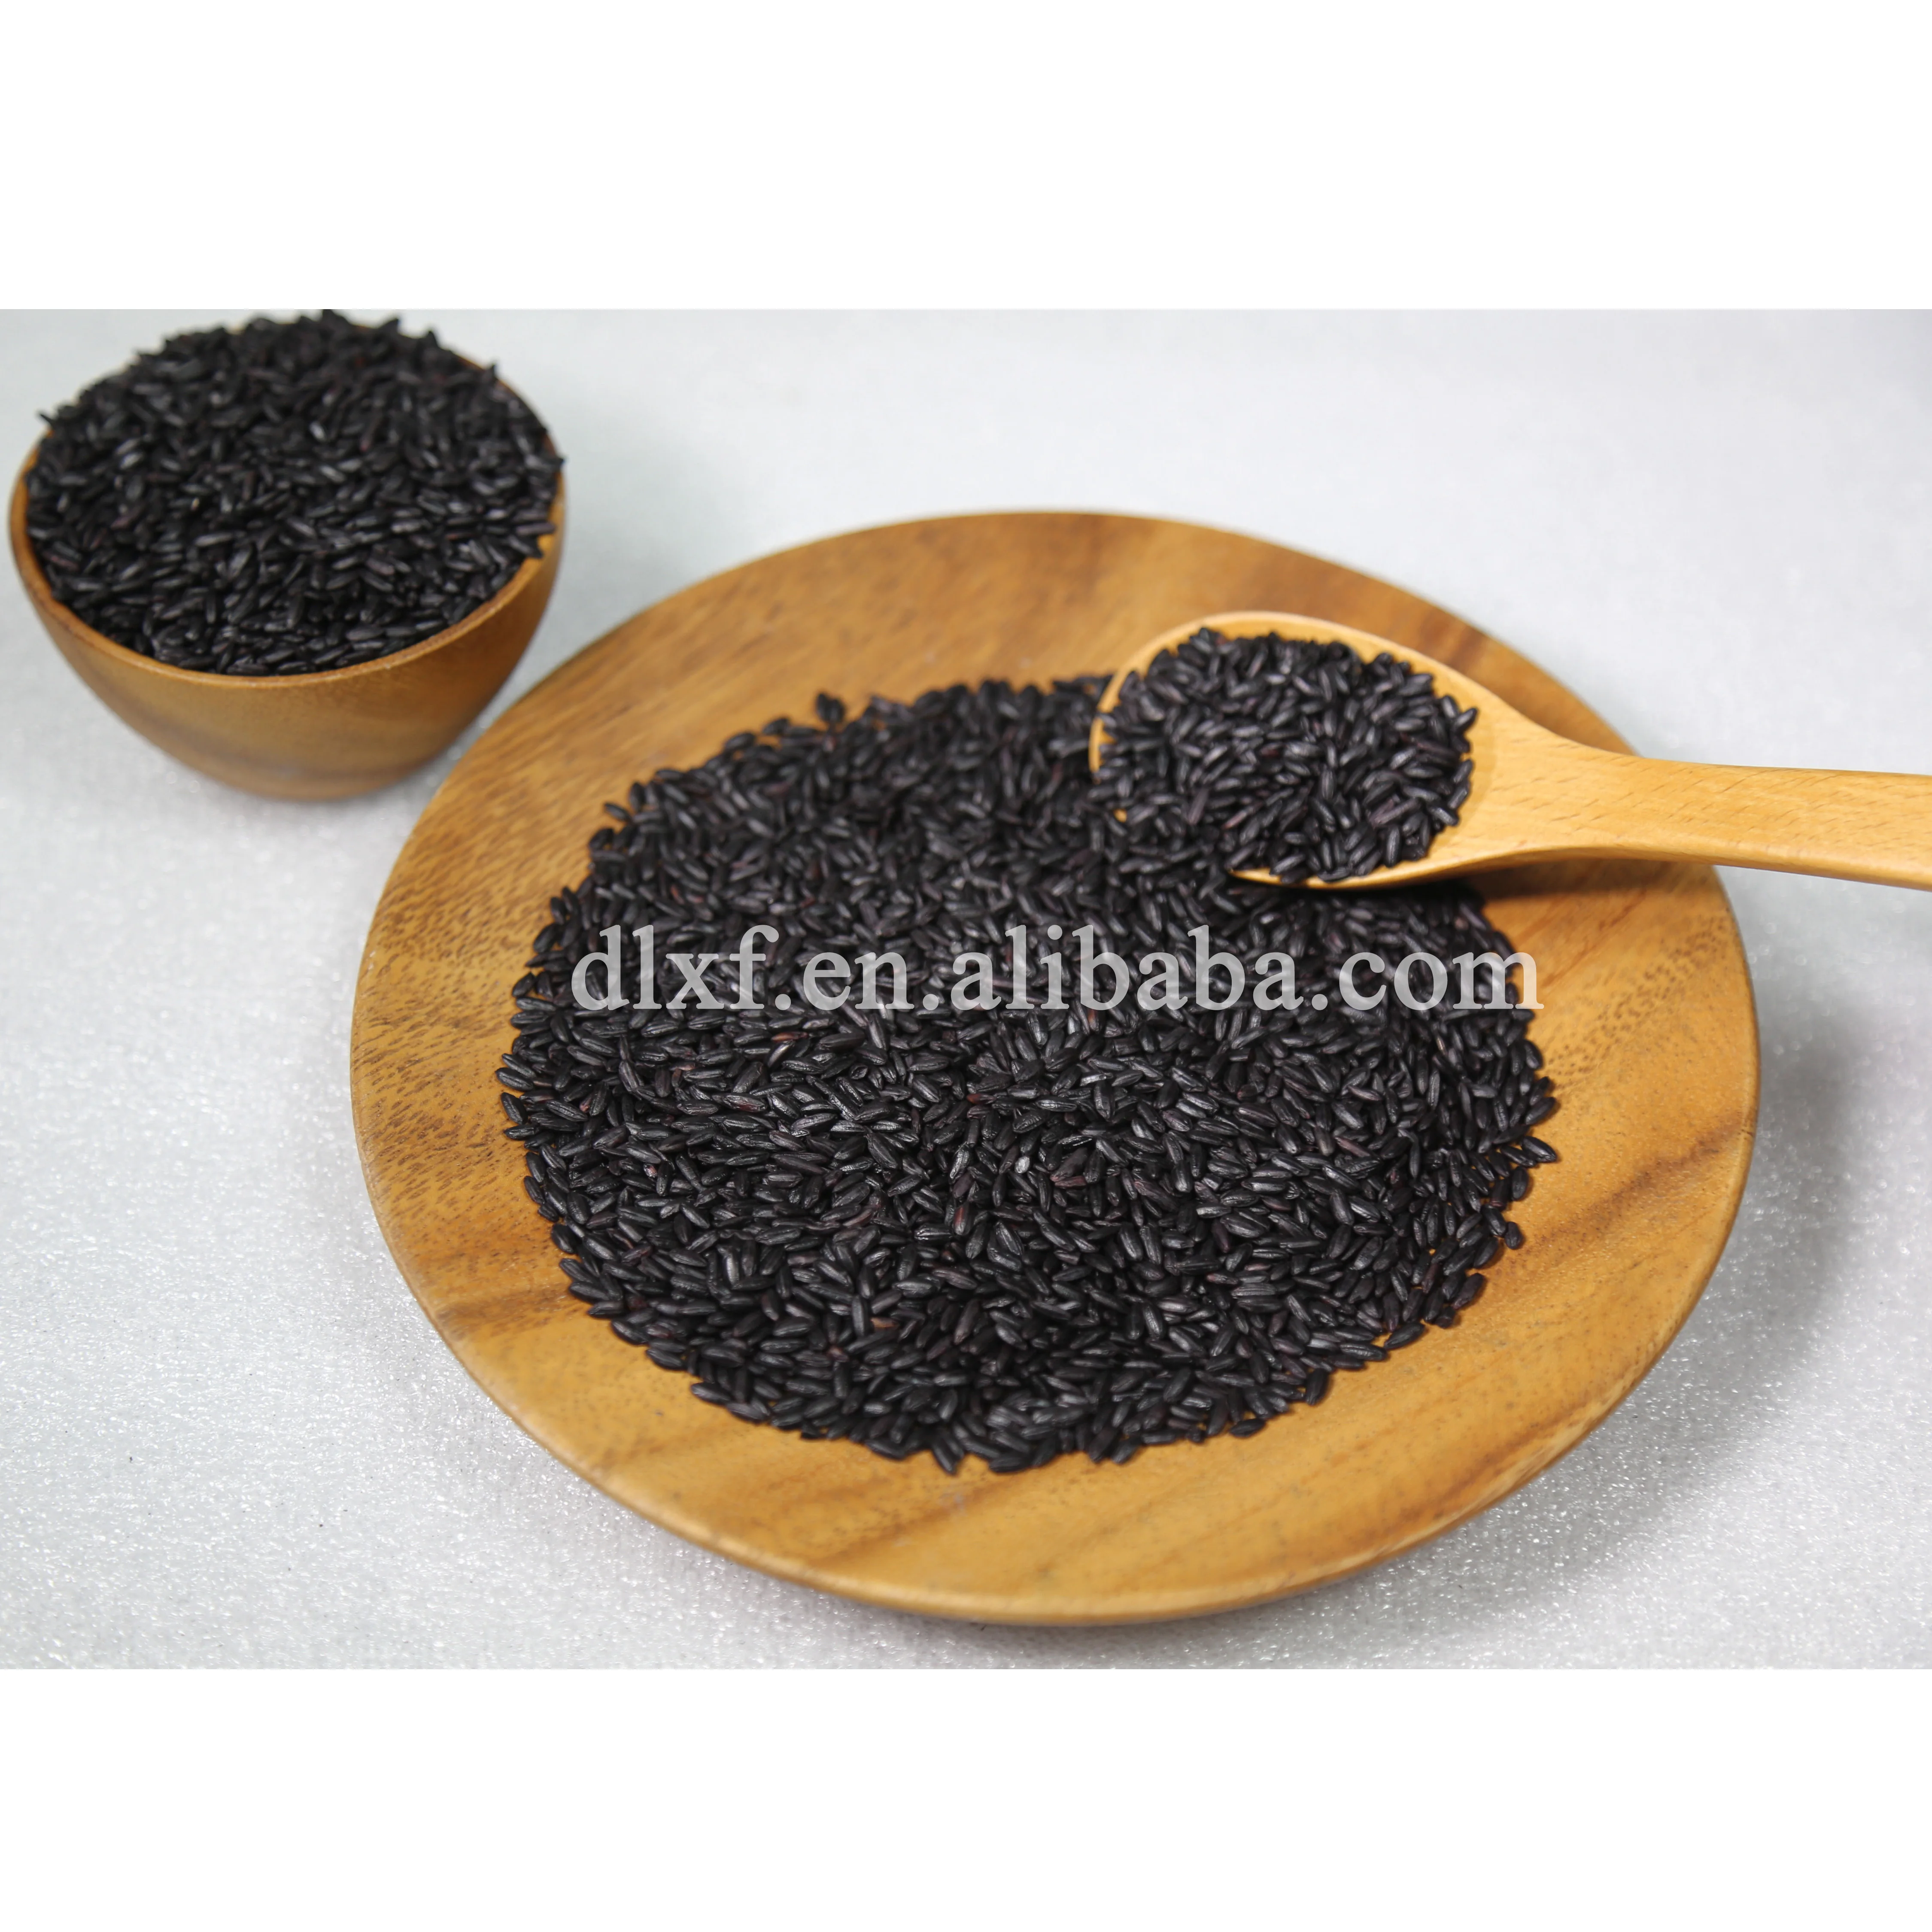 
hot sale china parboiled rice black rice steamed rice for sale 